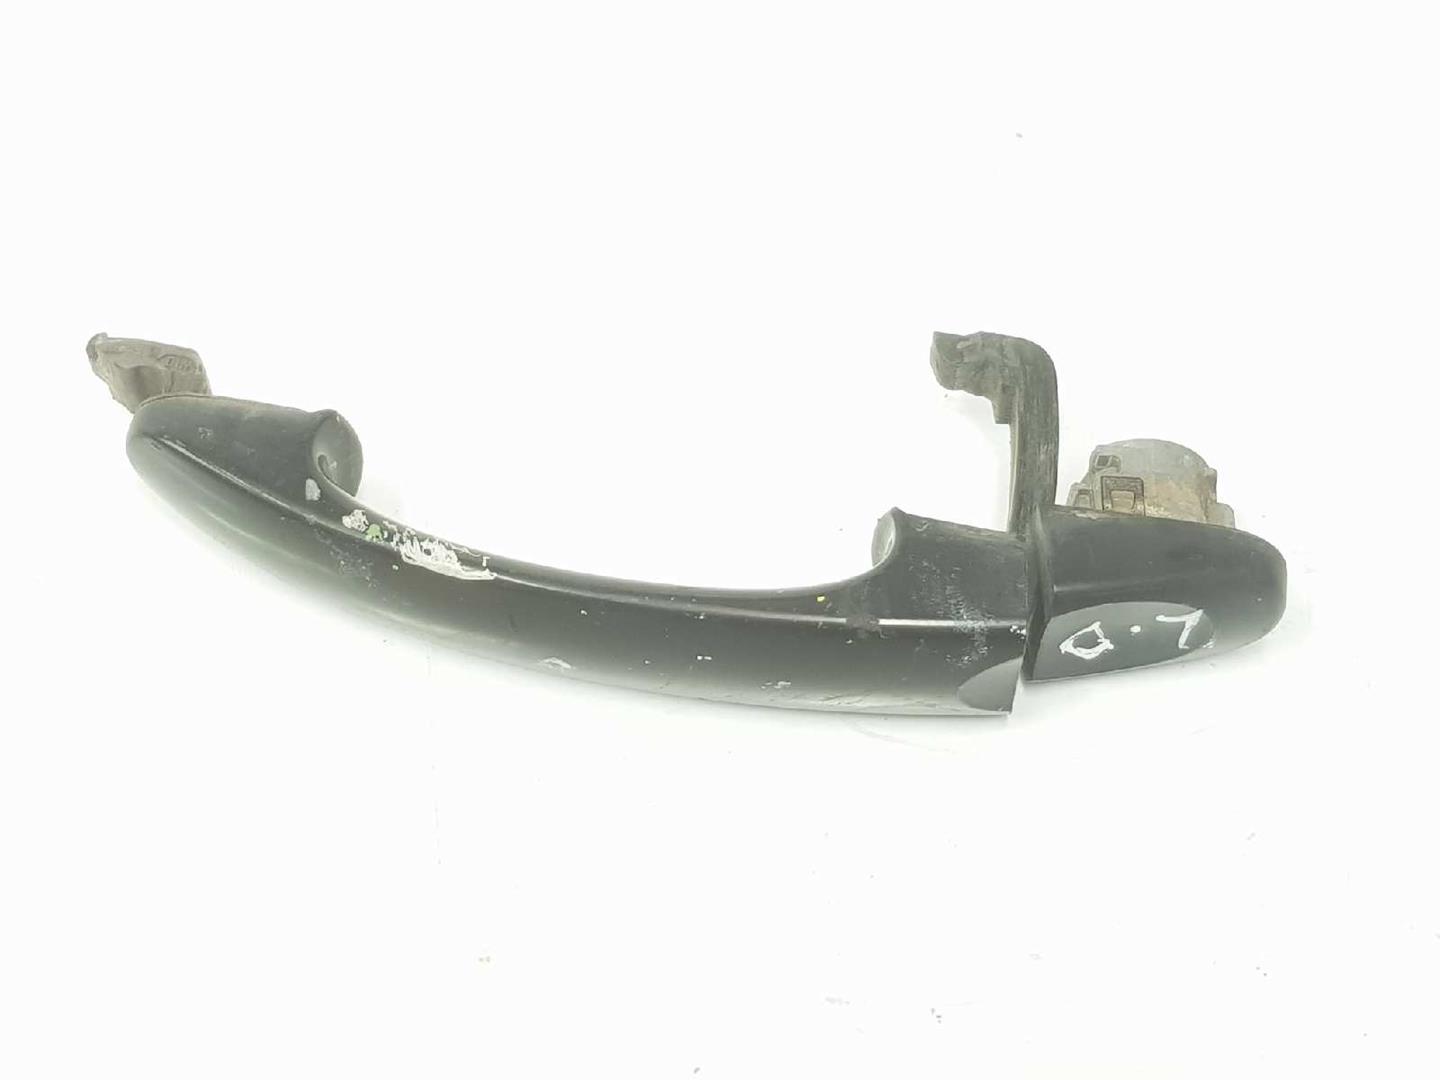 VOLKSWAGEN Caddy 3 generation (2004-2015) Other Body Parts 7E0843703B, 7E0843703B 19890953